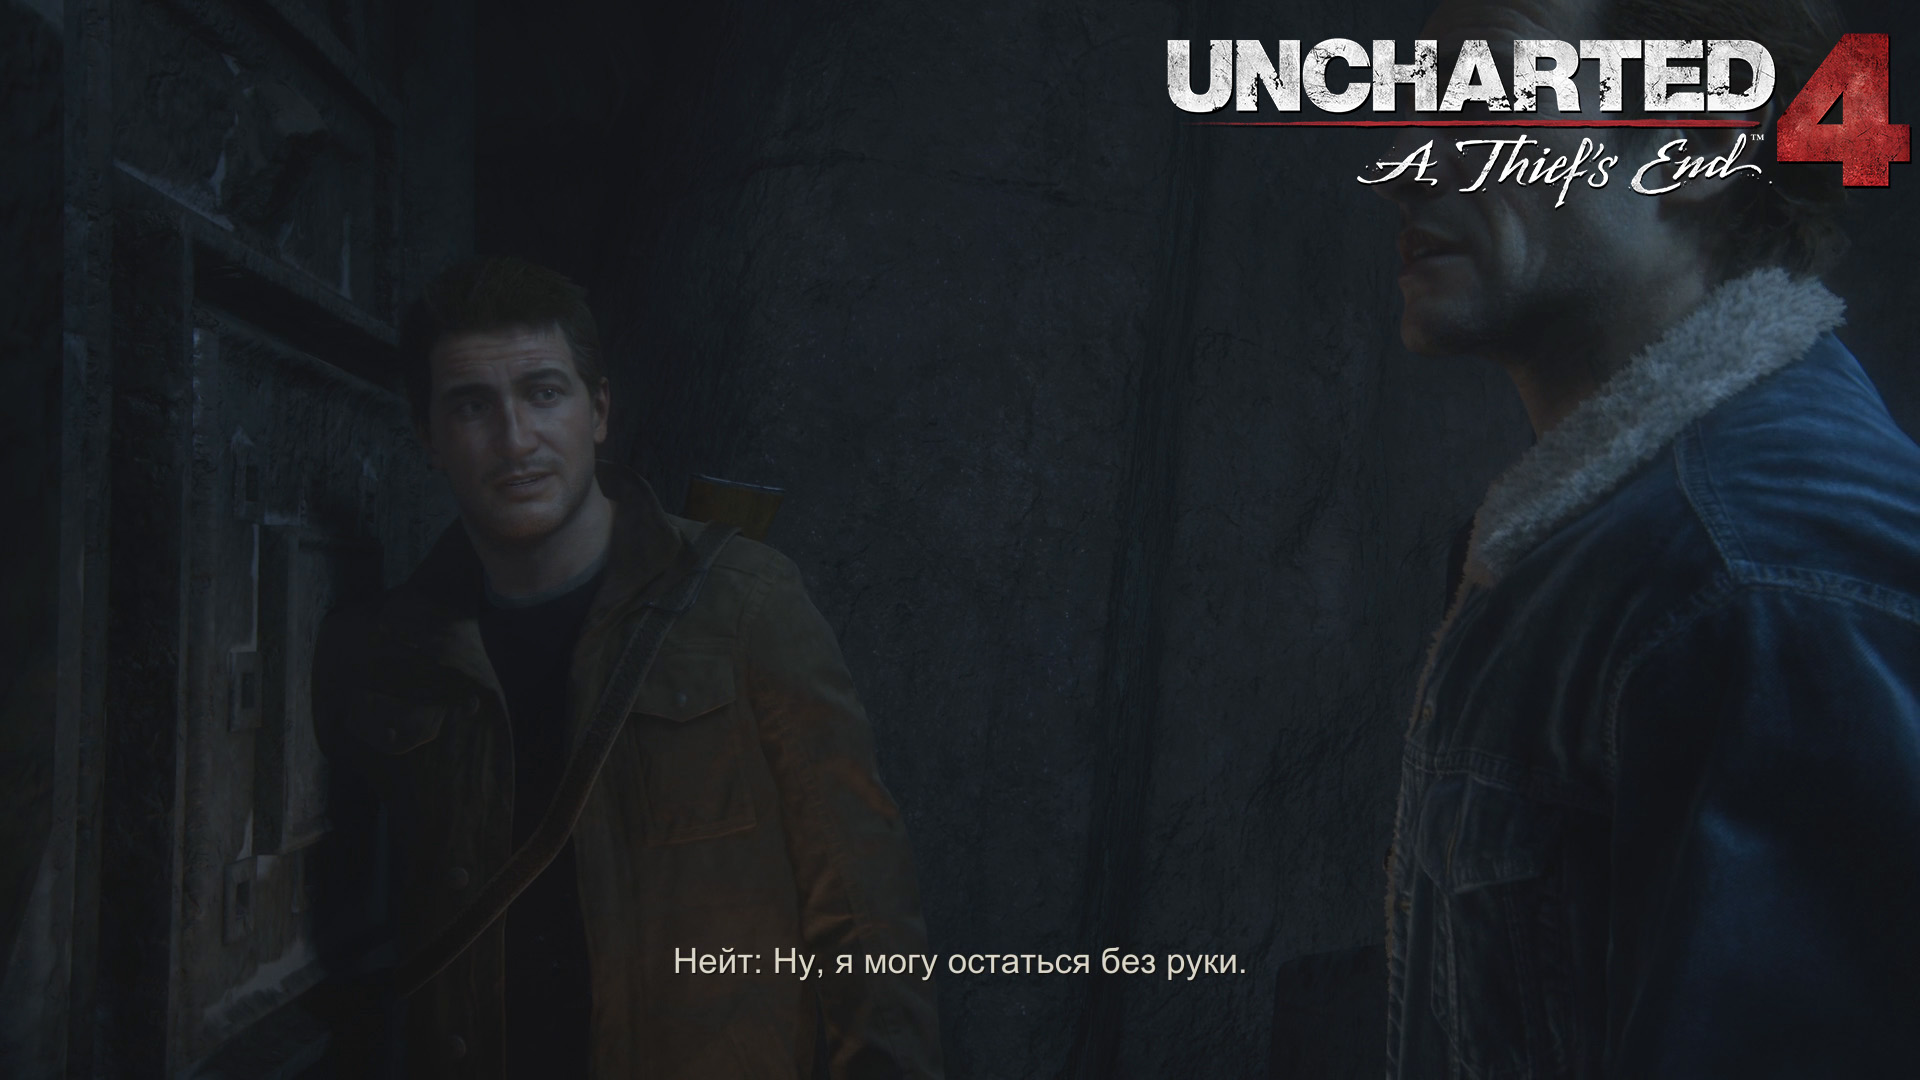 Uncharted 4: A Thief’s End ➪ # 9) А вдруг ловушка?